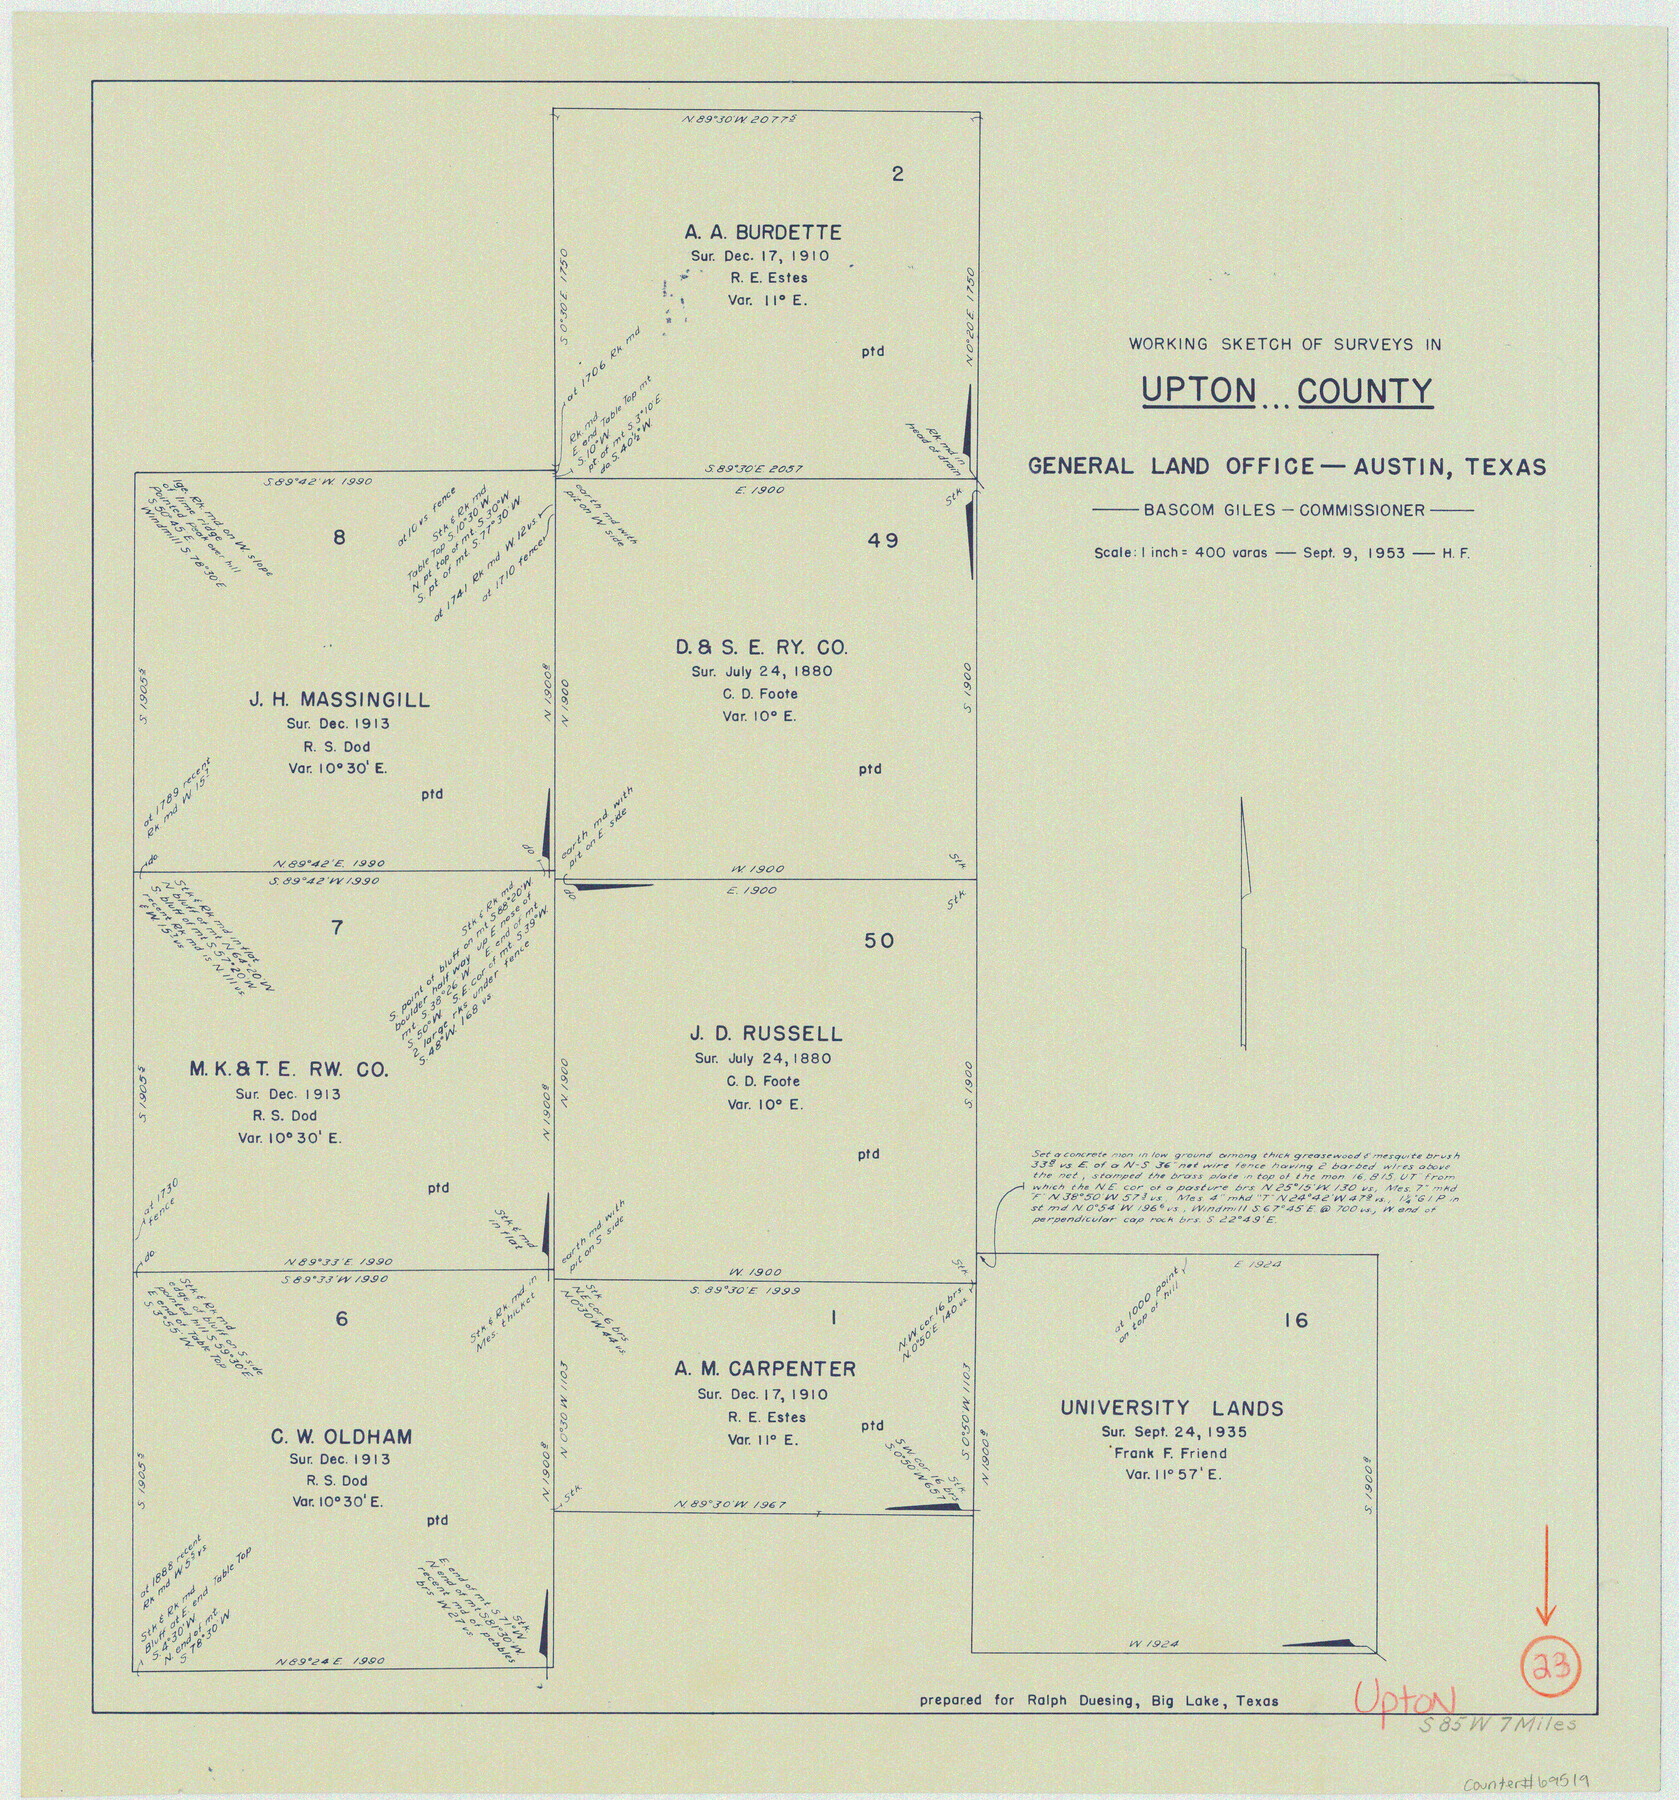 69519, Upton County Working Sketch 23, General Map Collection